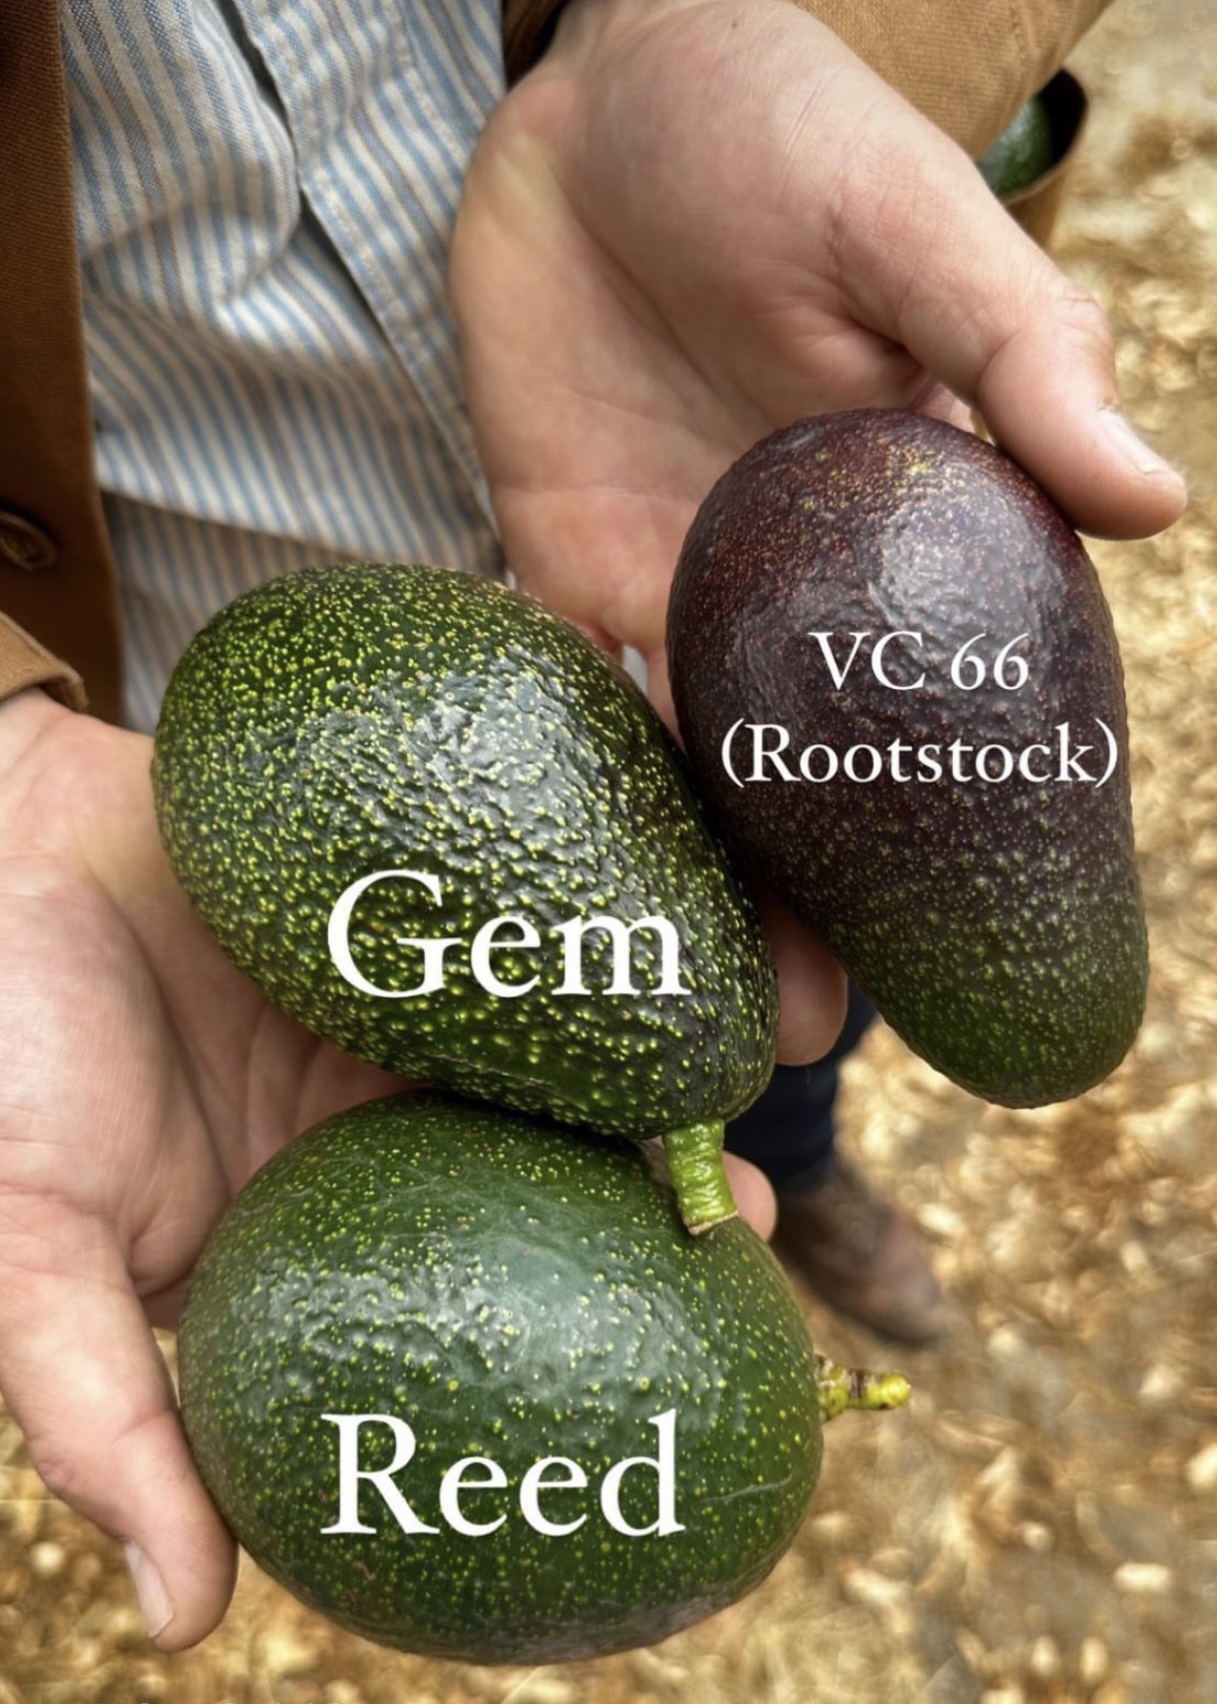 Reed, GEM and rootstock avocados for comparison